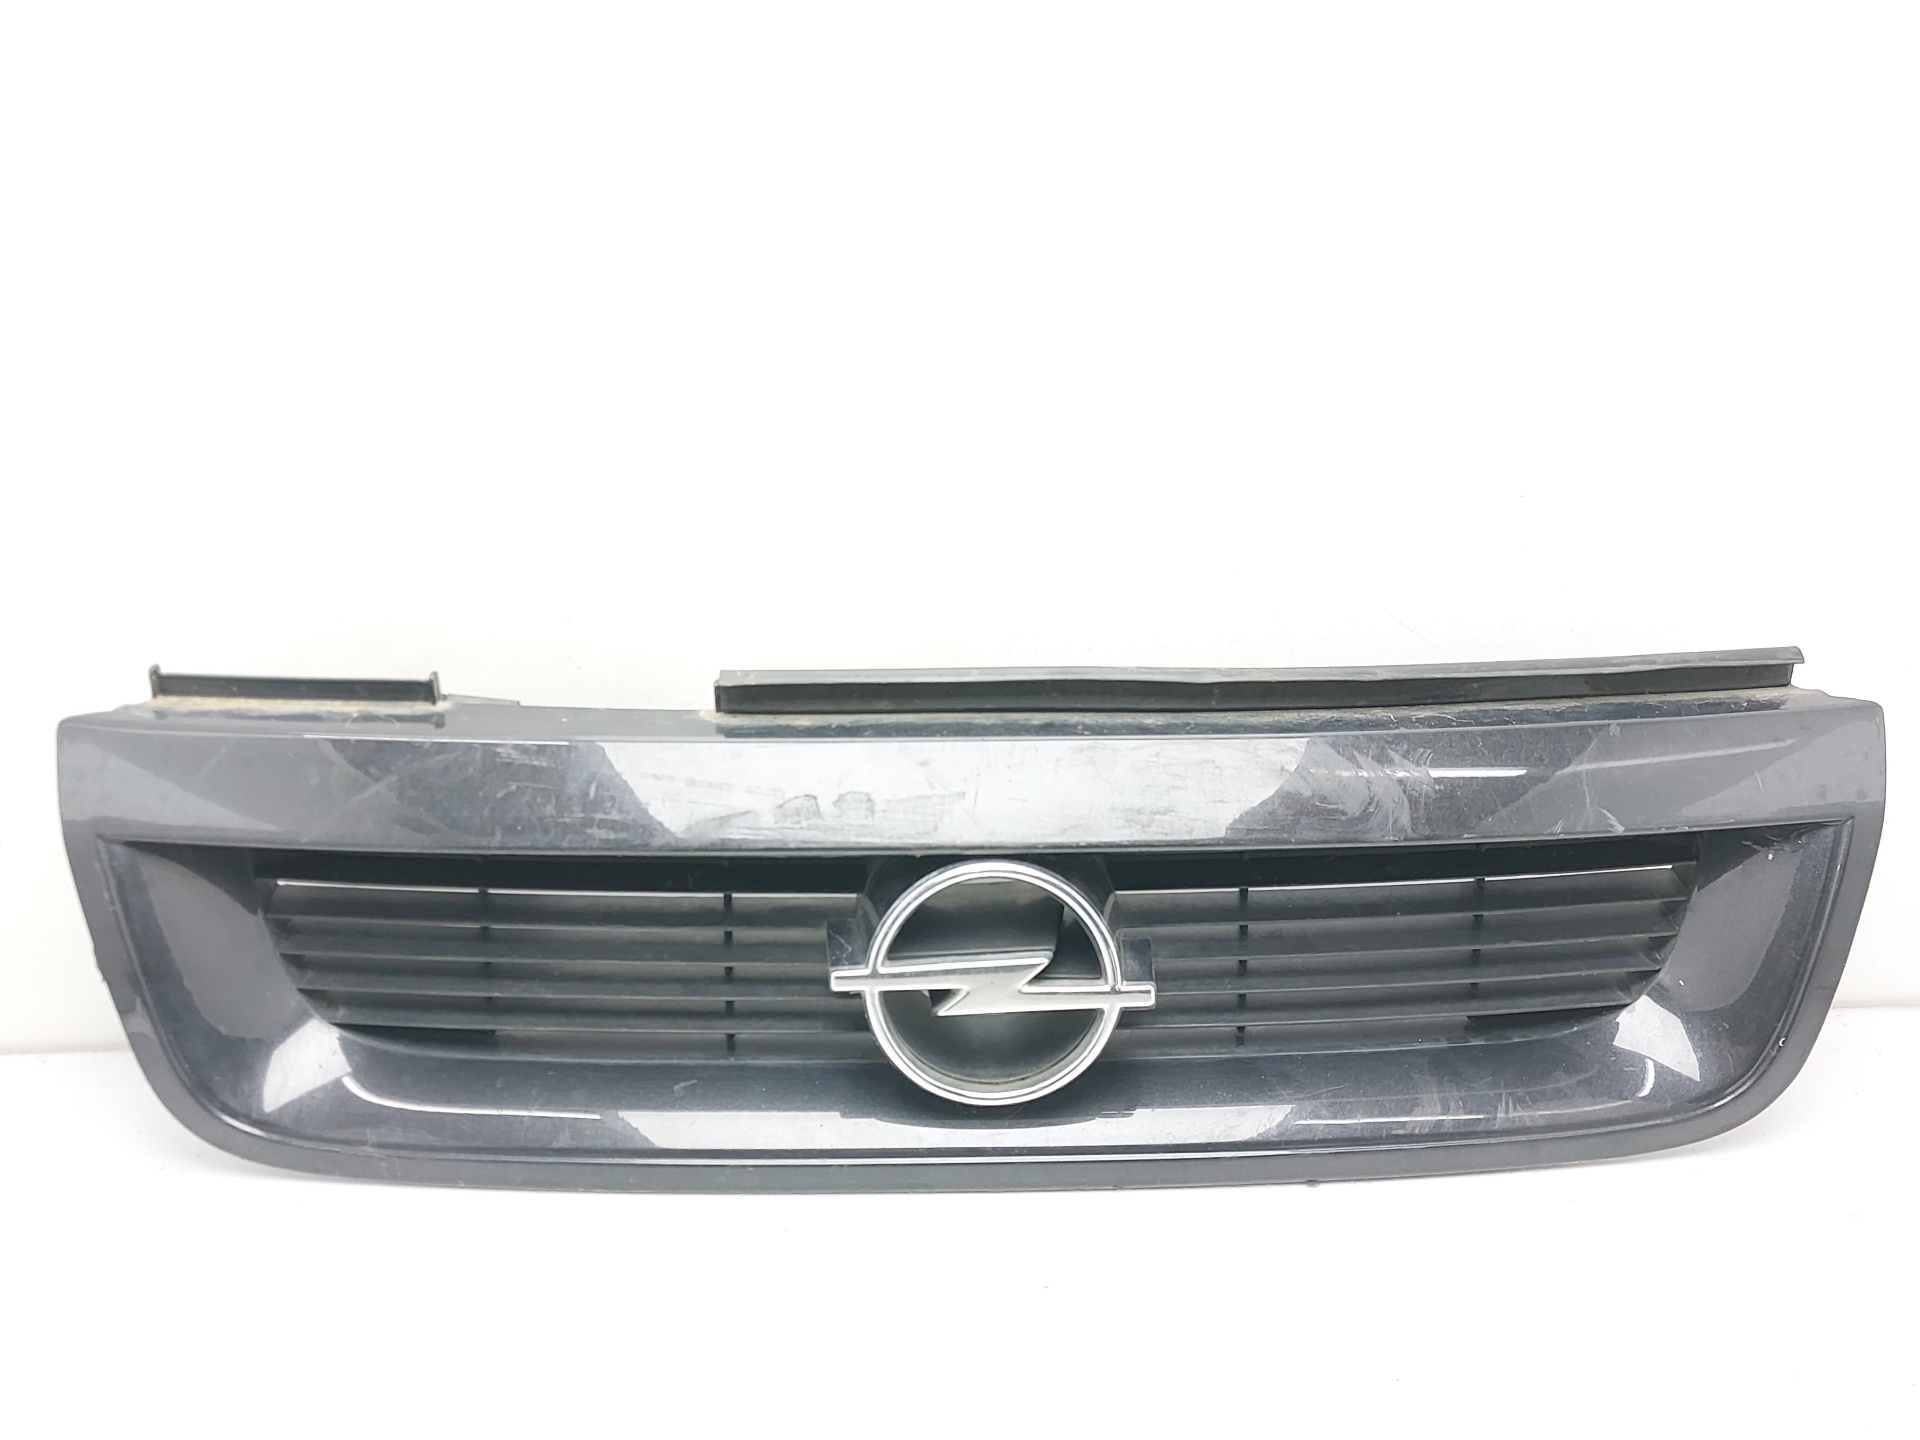 OPEL Vectra A (1988-1995) Radiator Grille 90461334 22485451